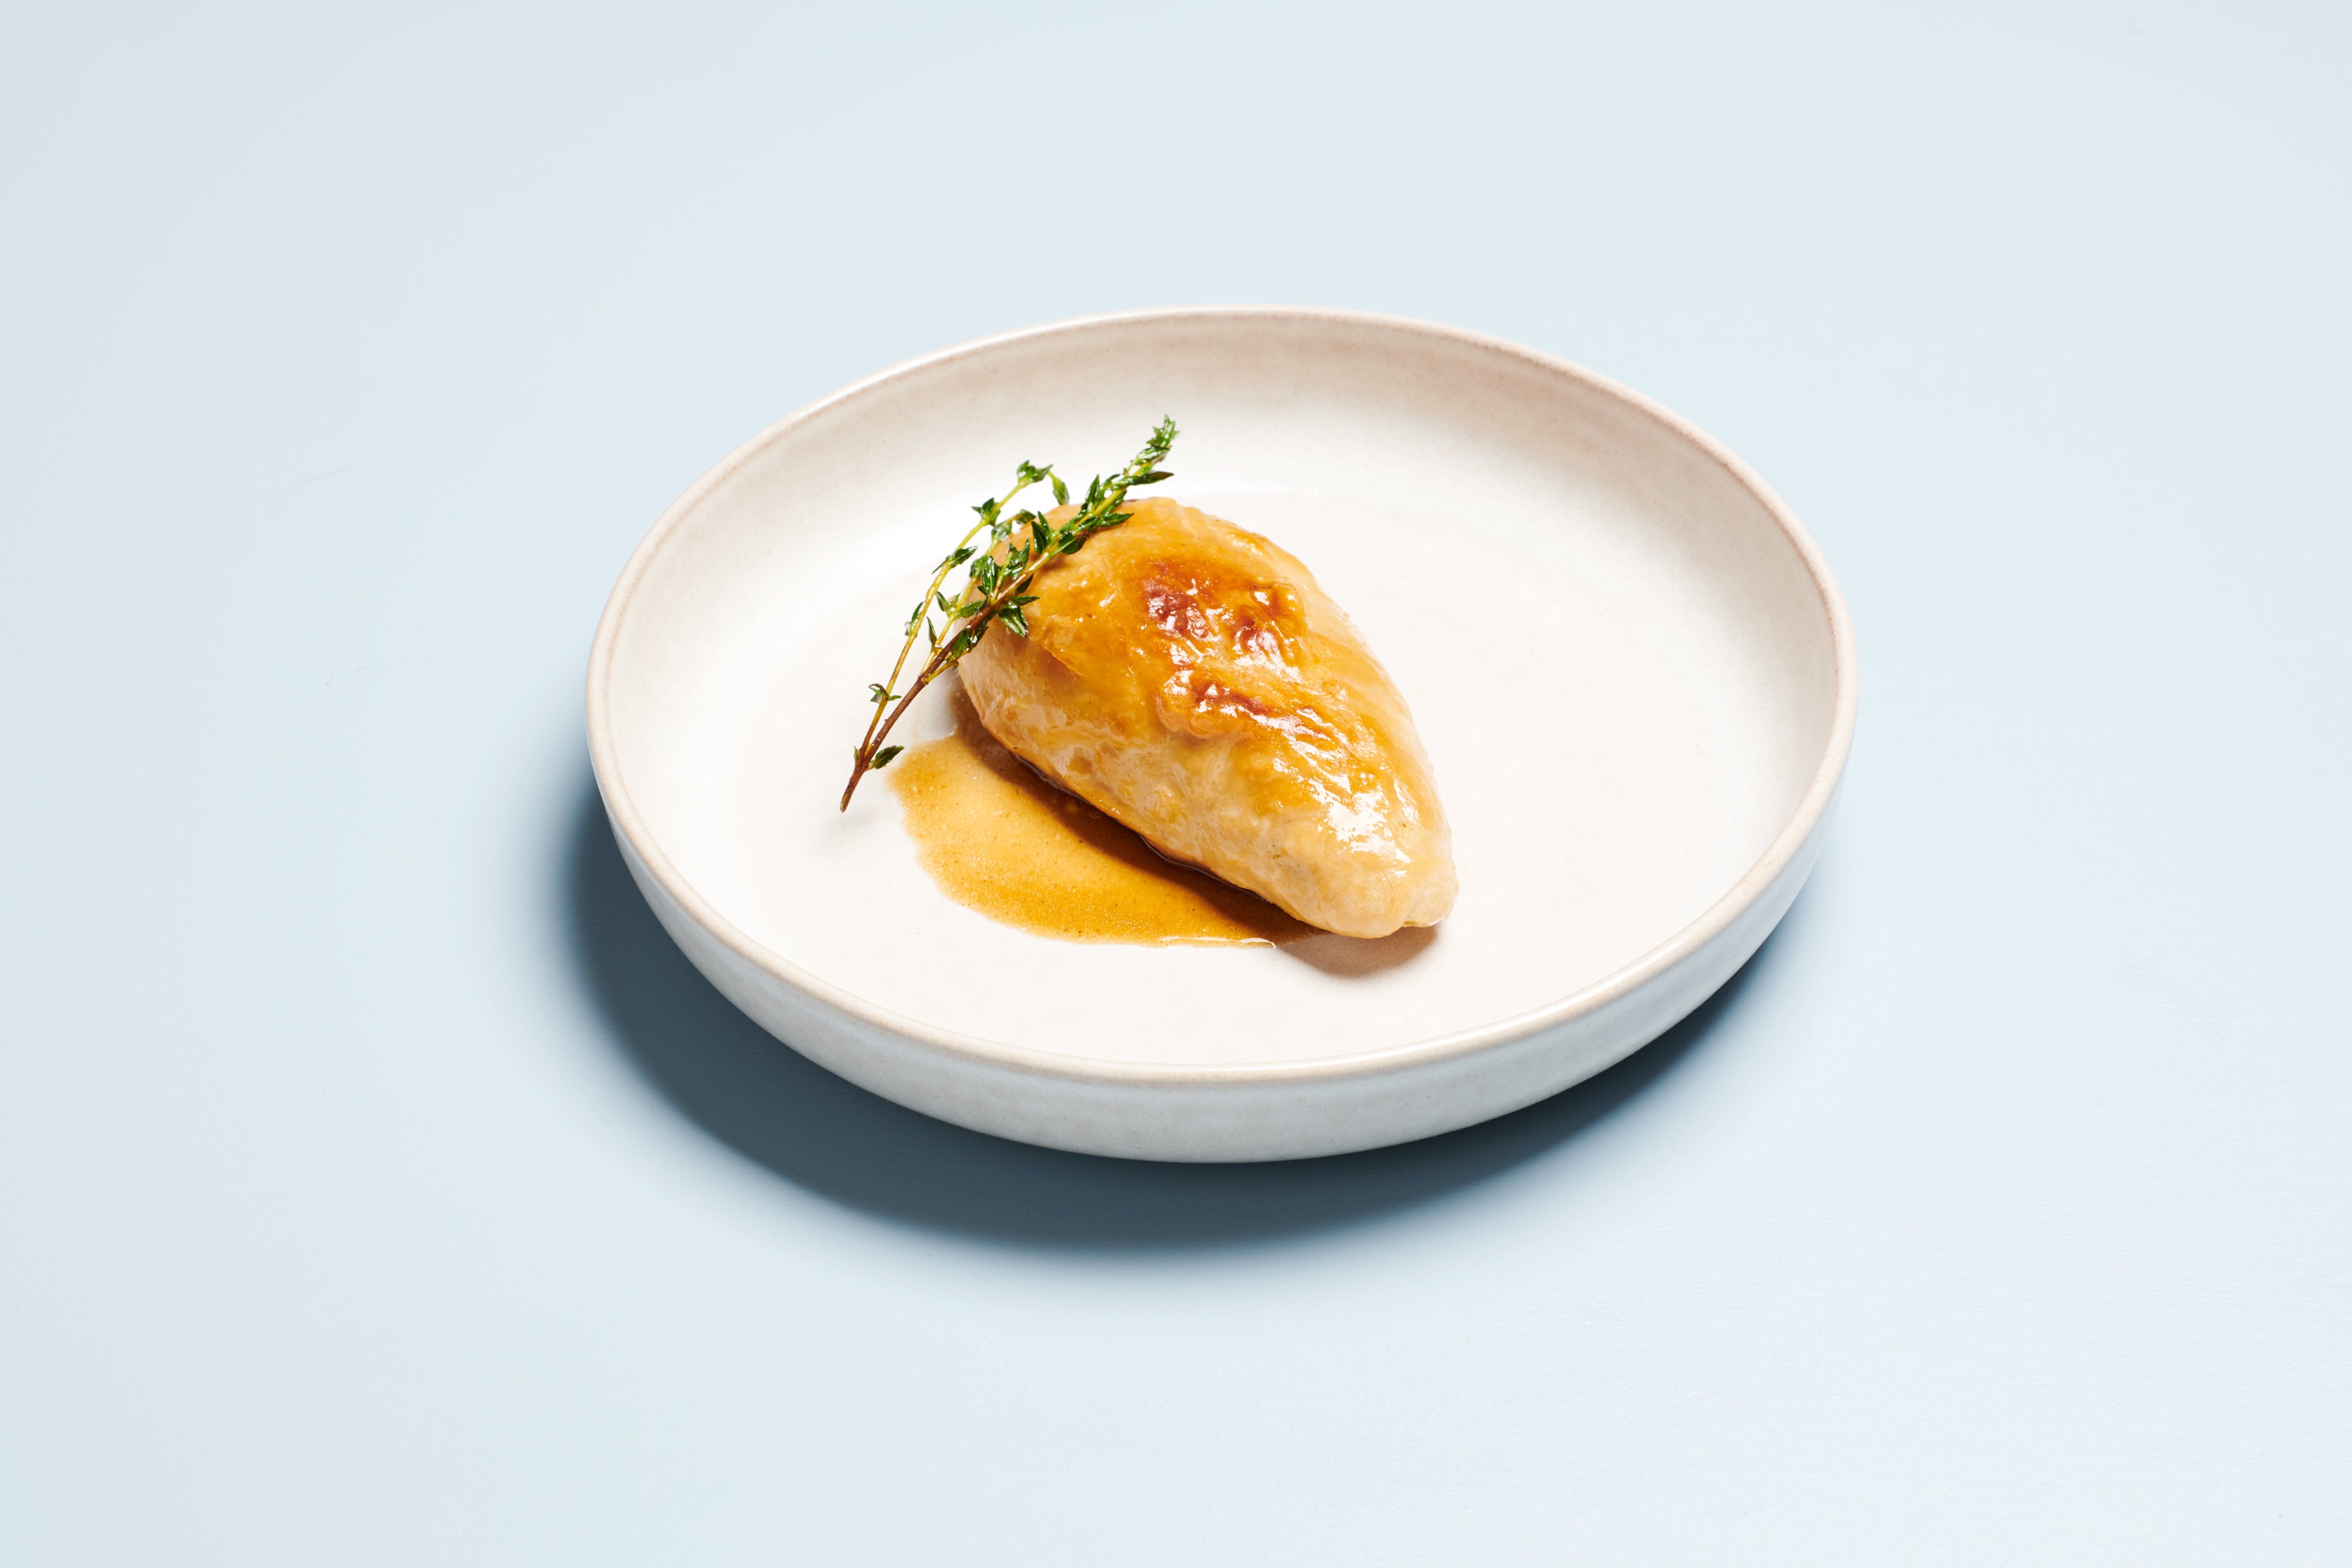 Planted develops the first vegetable chicken breast in one piece completely without additives